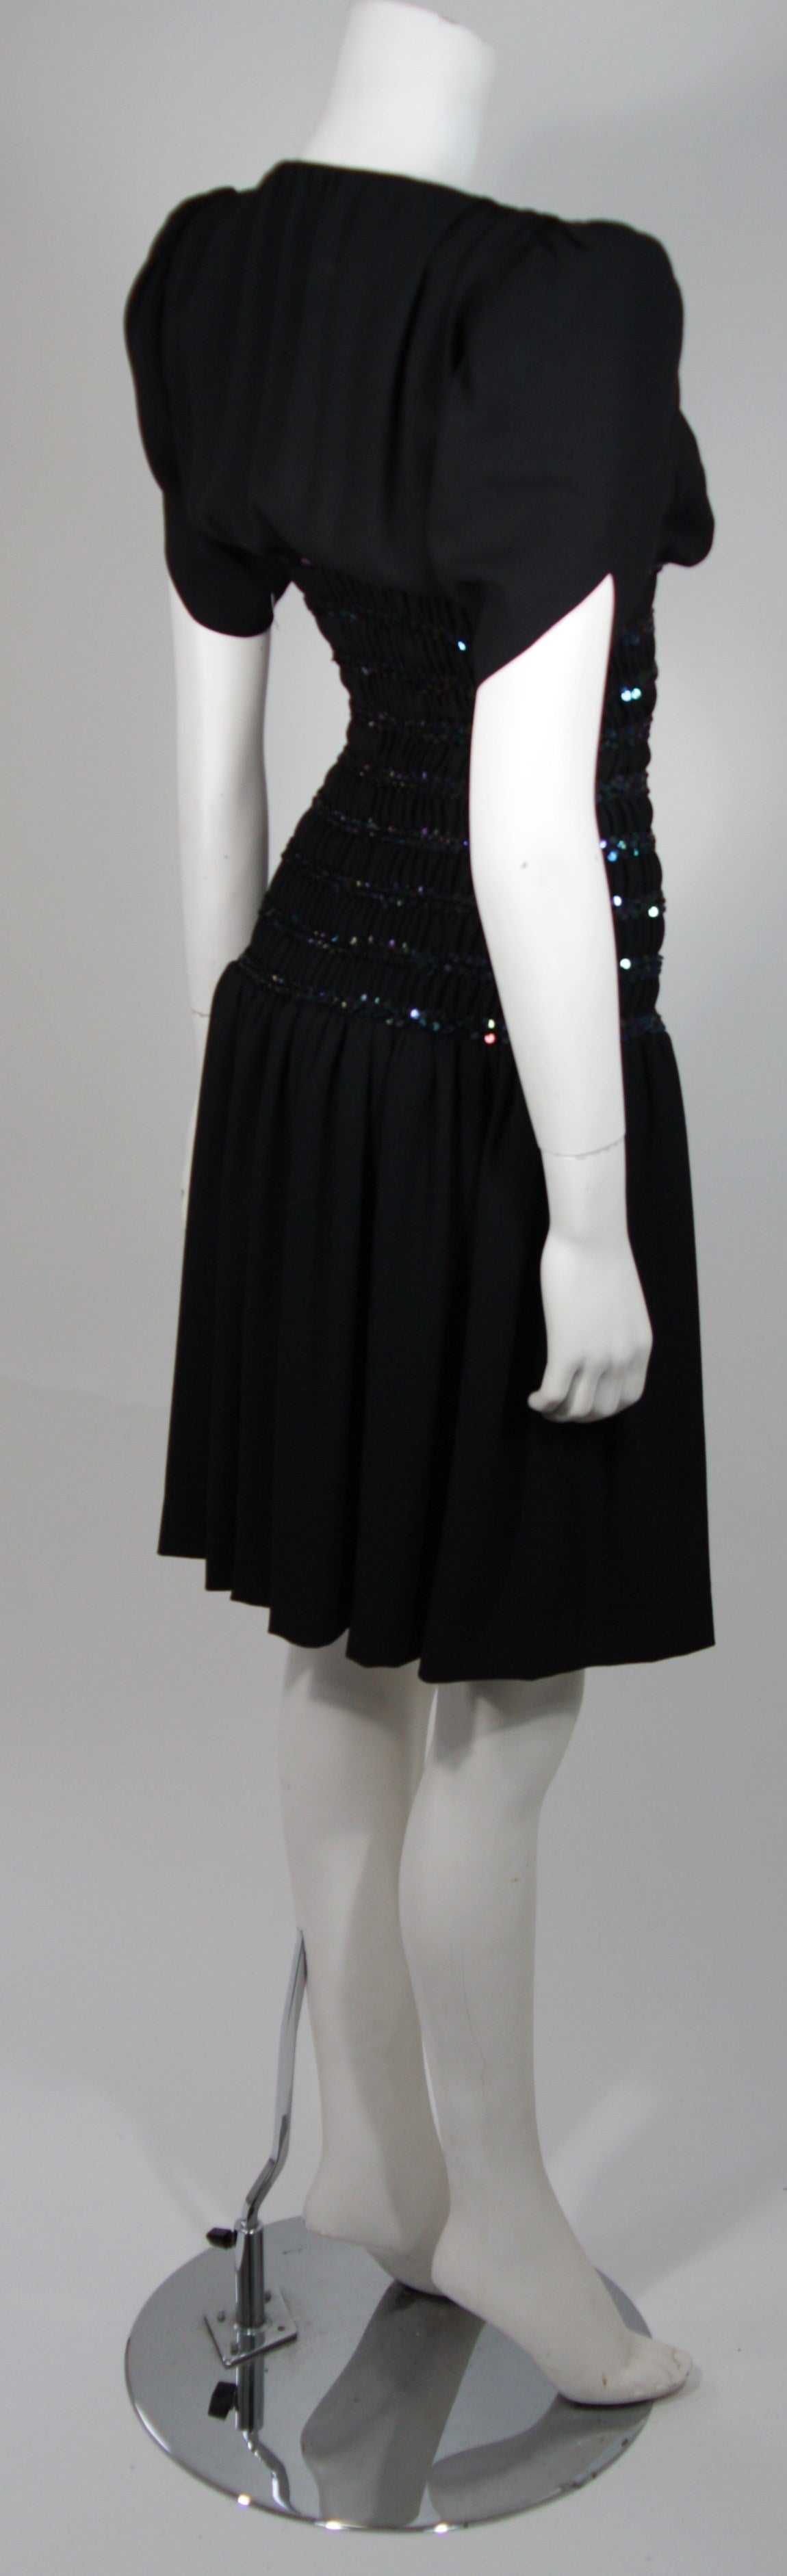 Yves Saint Laurent Black Cocktail Gown with Sequin Smocked Waist Size 38 For Sale 3